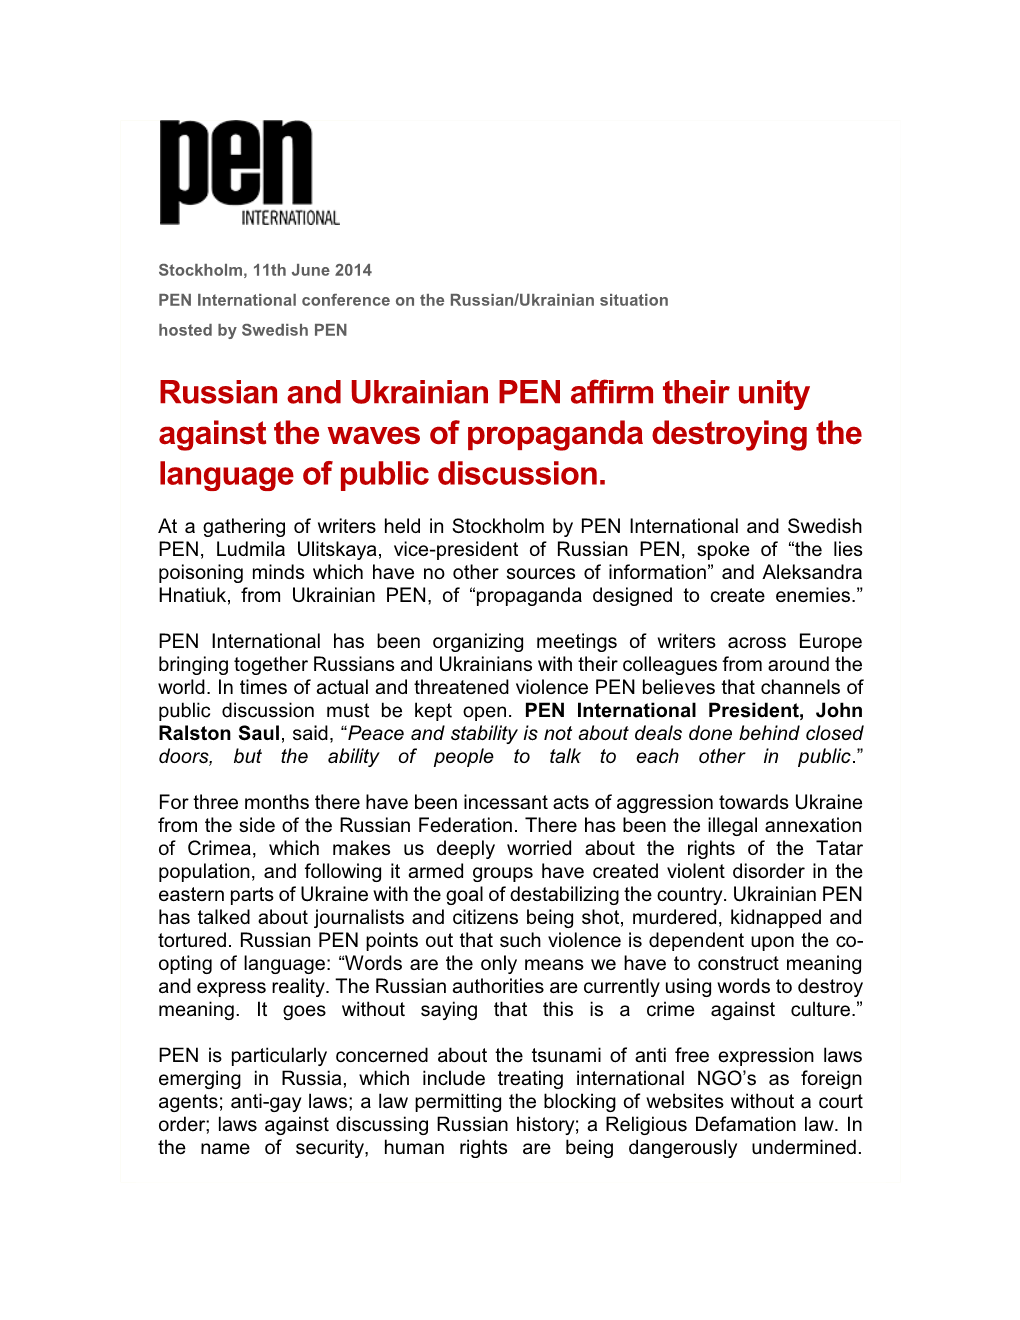 Russian and Ukrainian PEN Affirm Their Unity Against the Waves of Propaganda Destroying the Language of Public Discussion